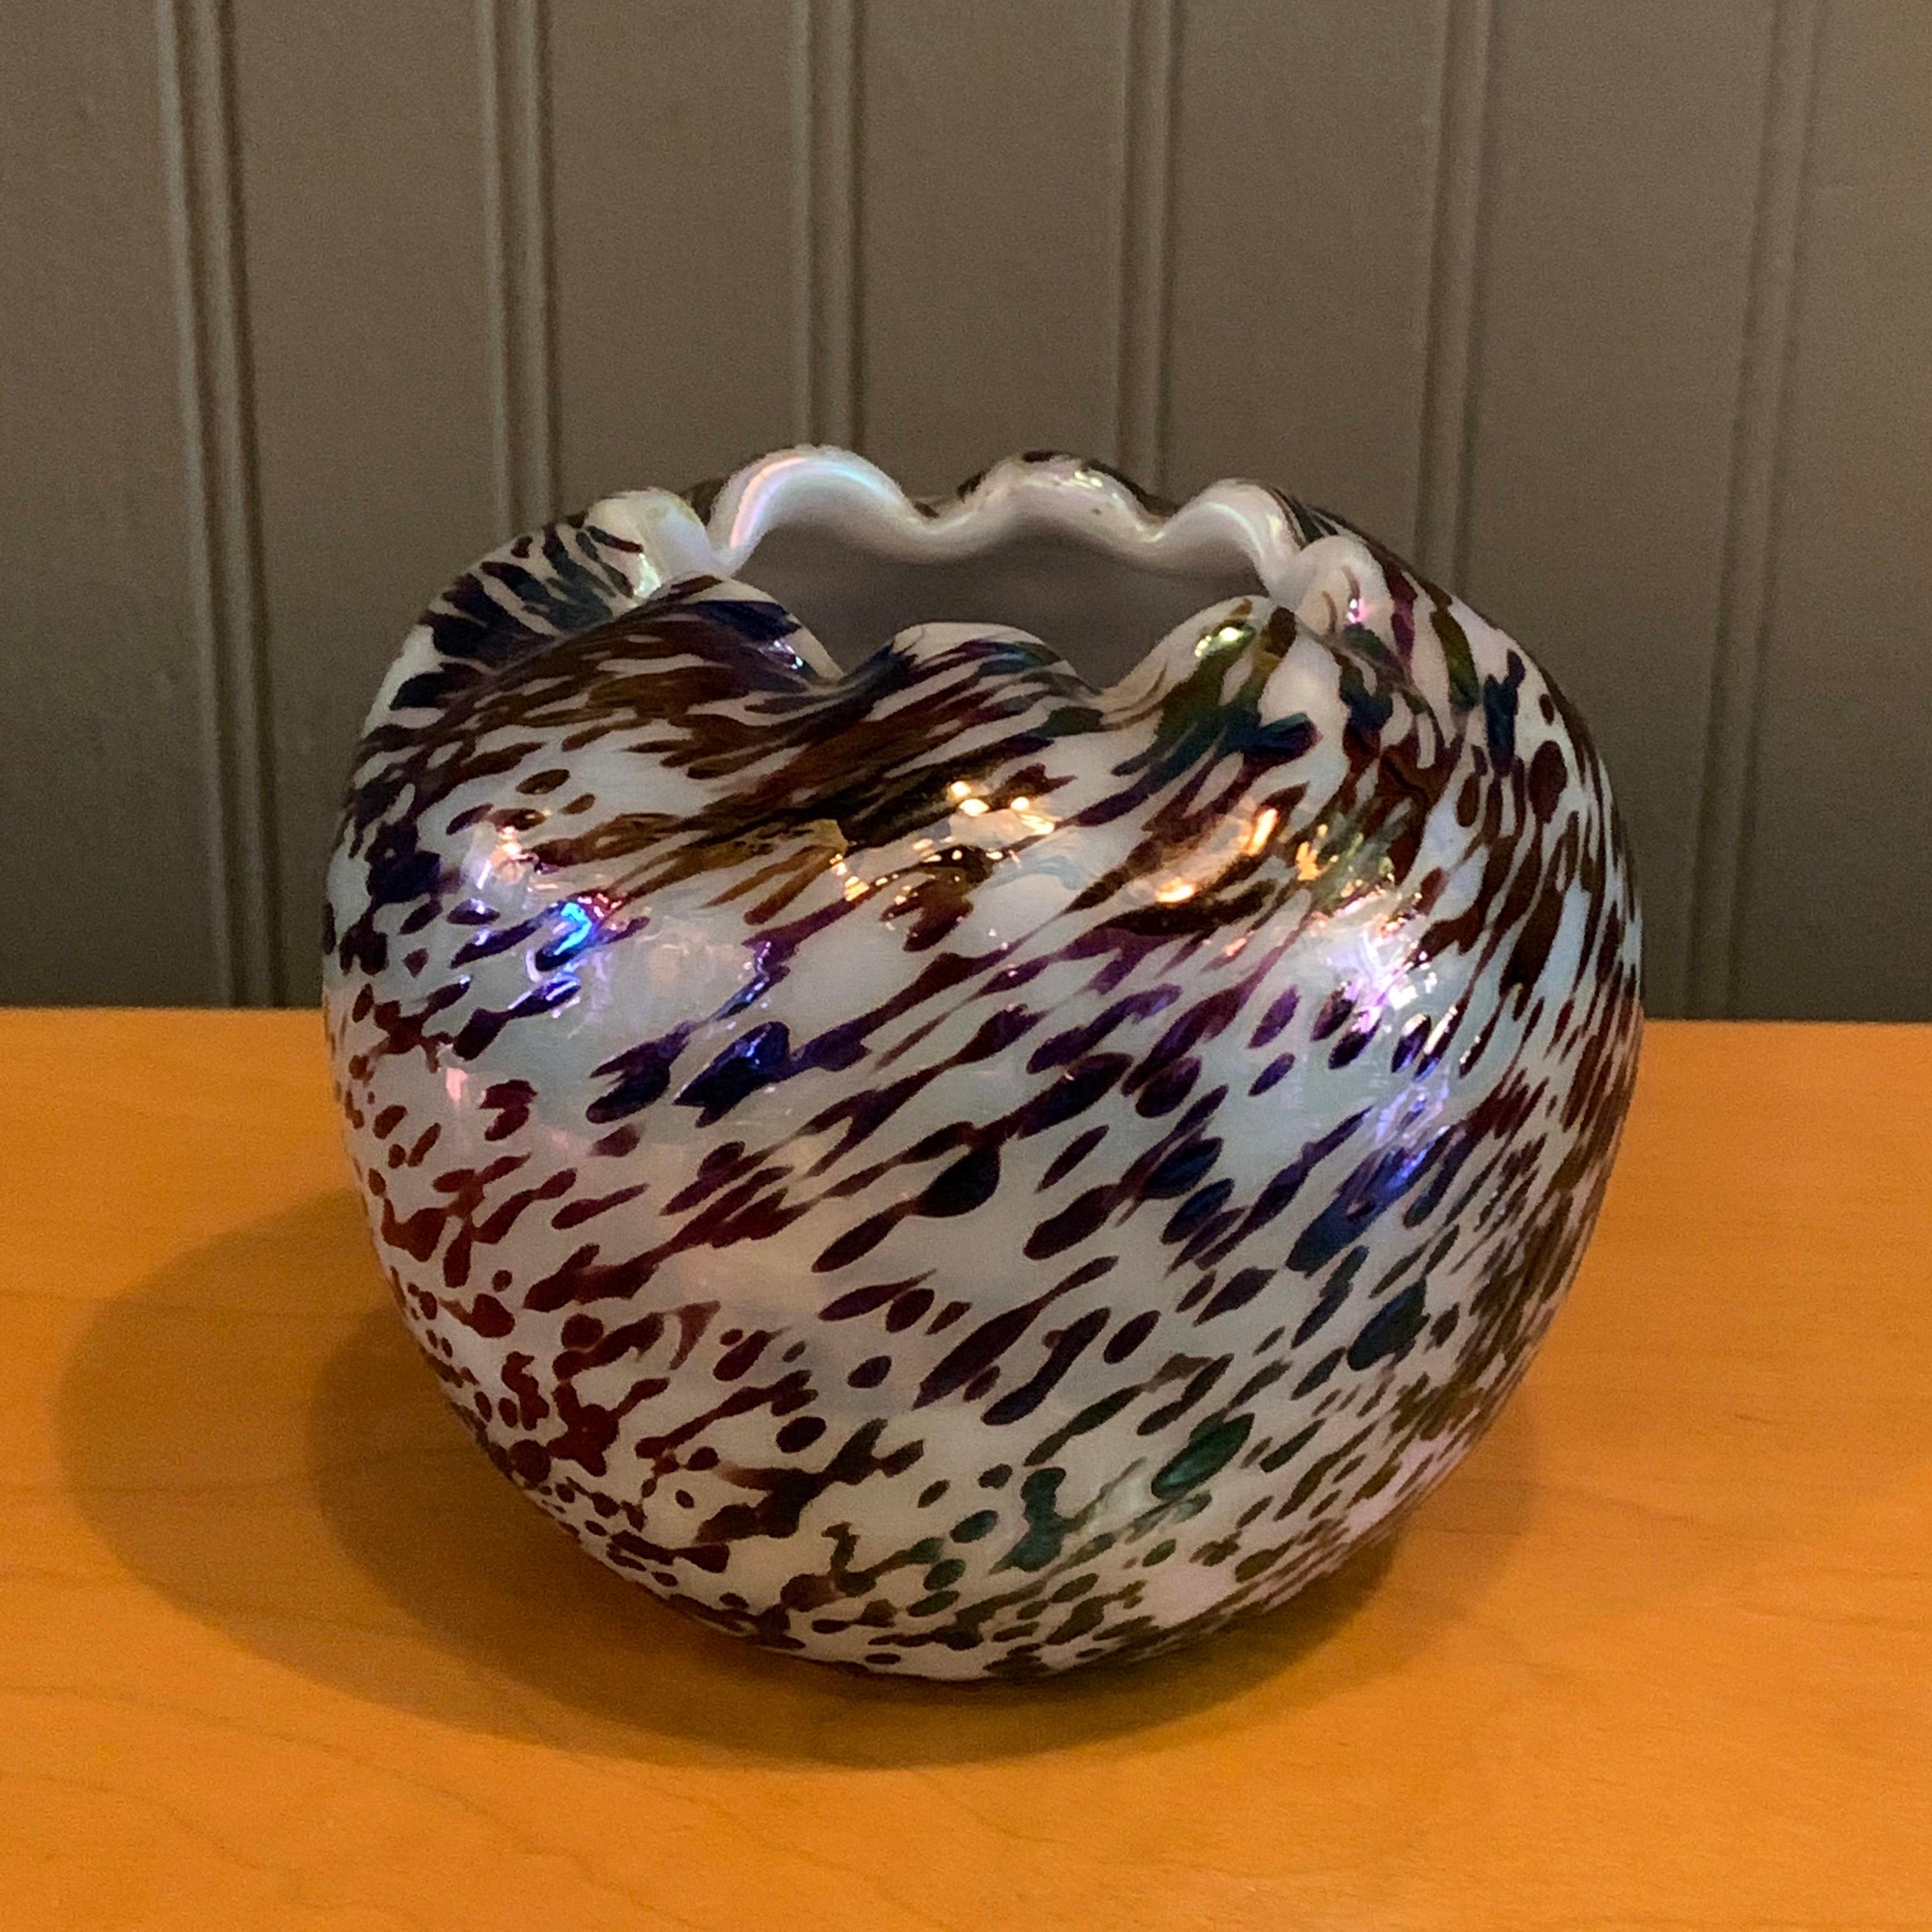 Lovely, little, midcentury, hand blown glass vase features a speckled treatment with iridescent finish and pie crust ruffle opening.